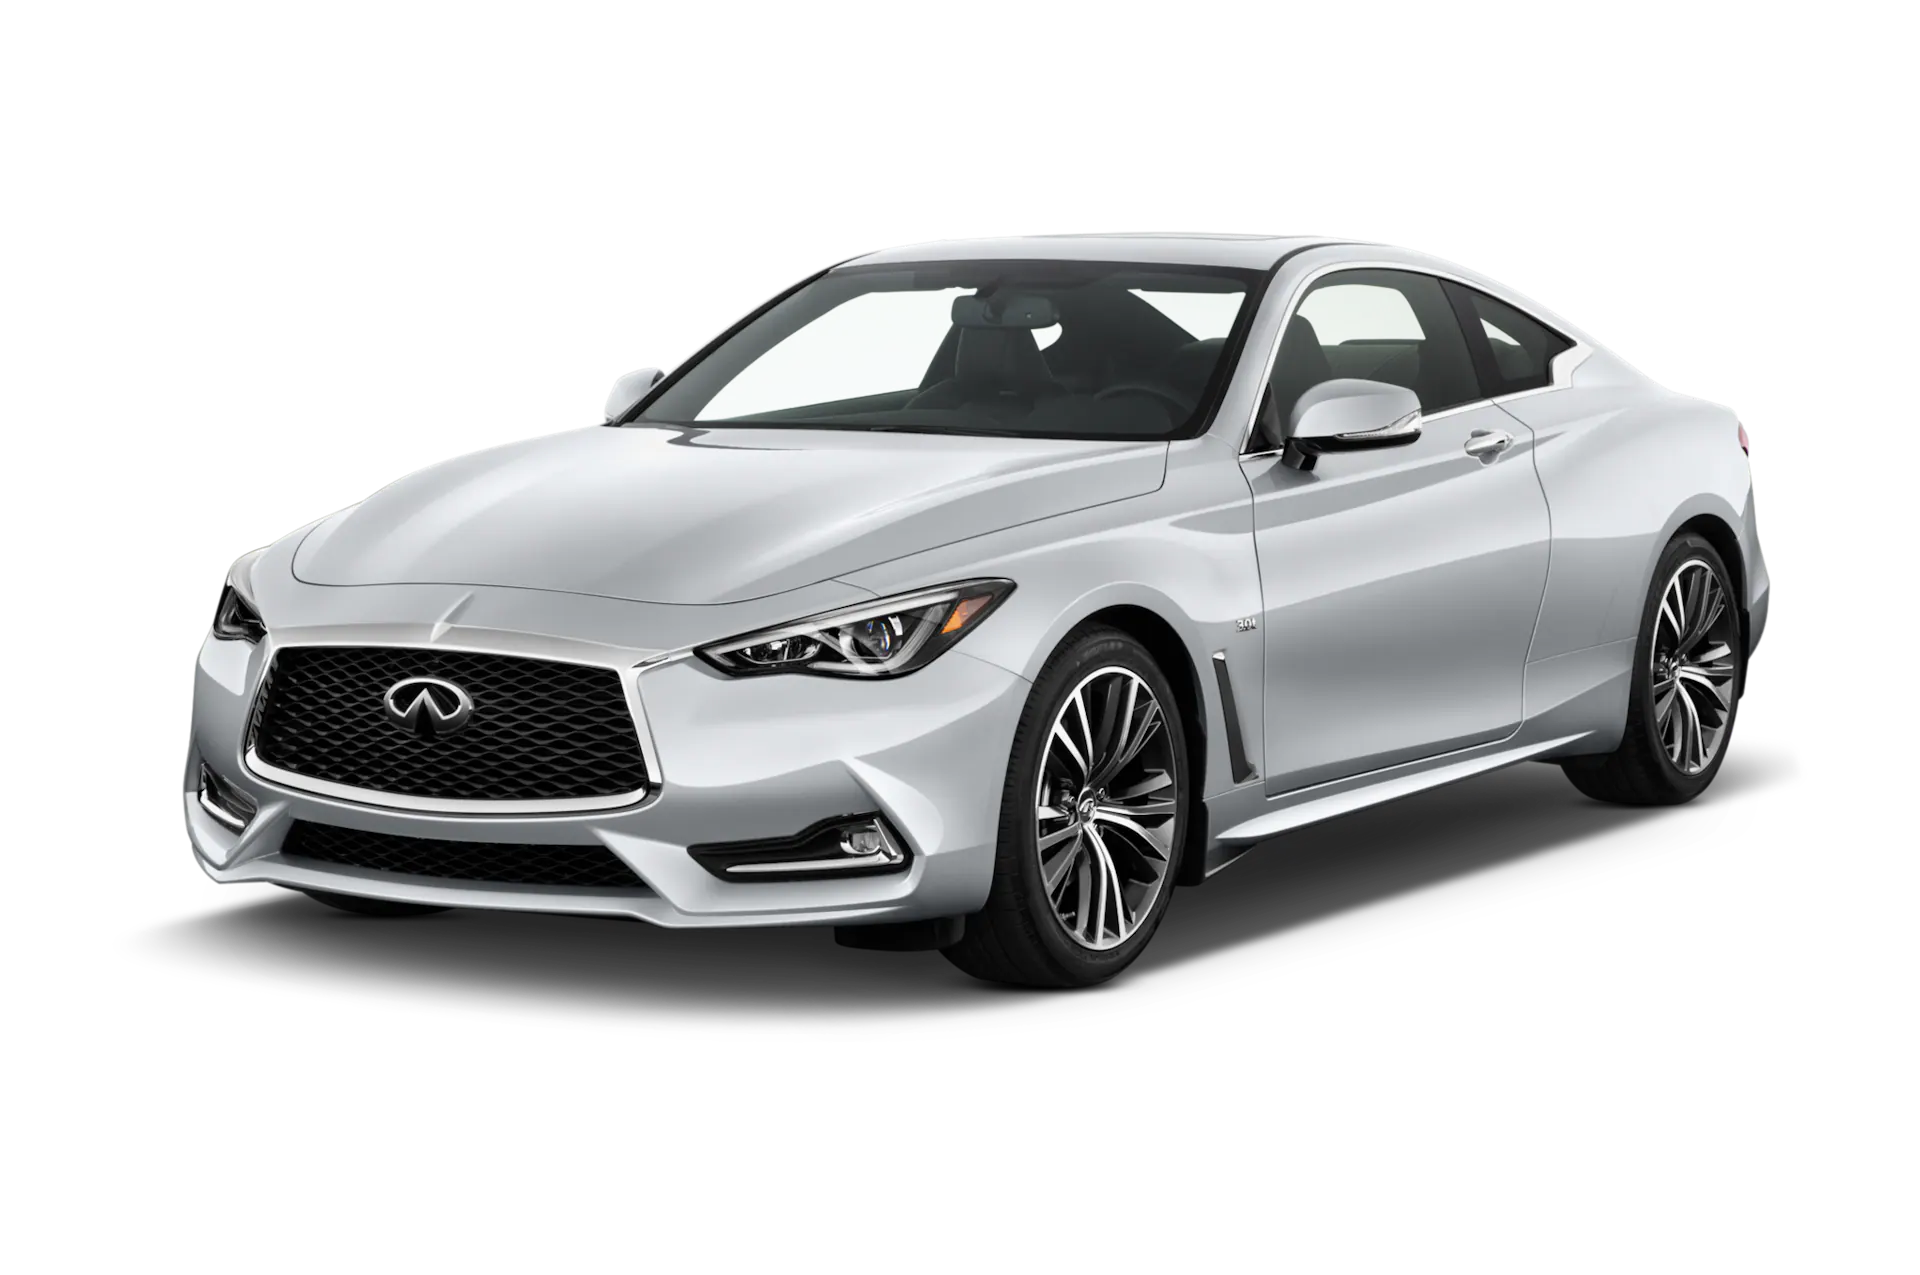 2021 Infiniti Q60 Coupe Featured